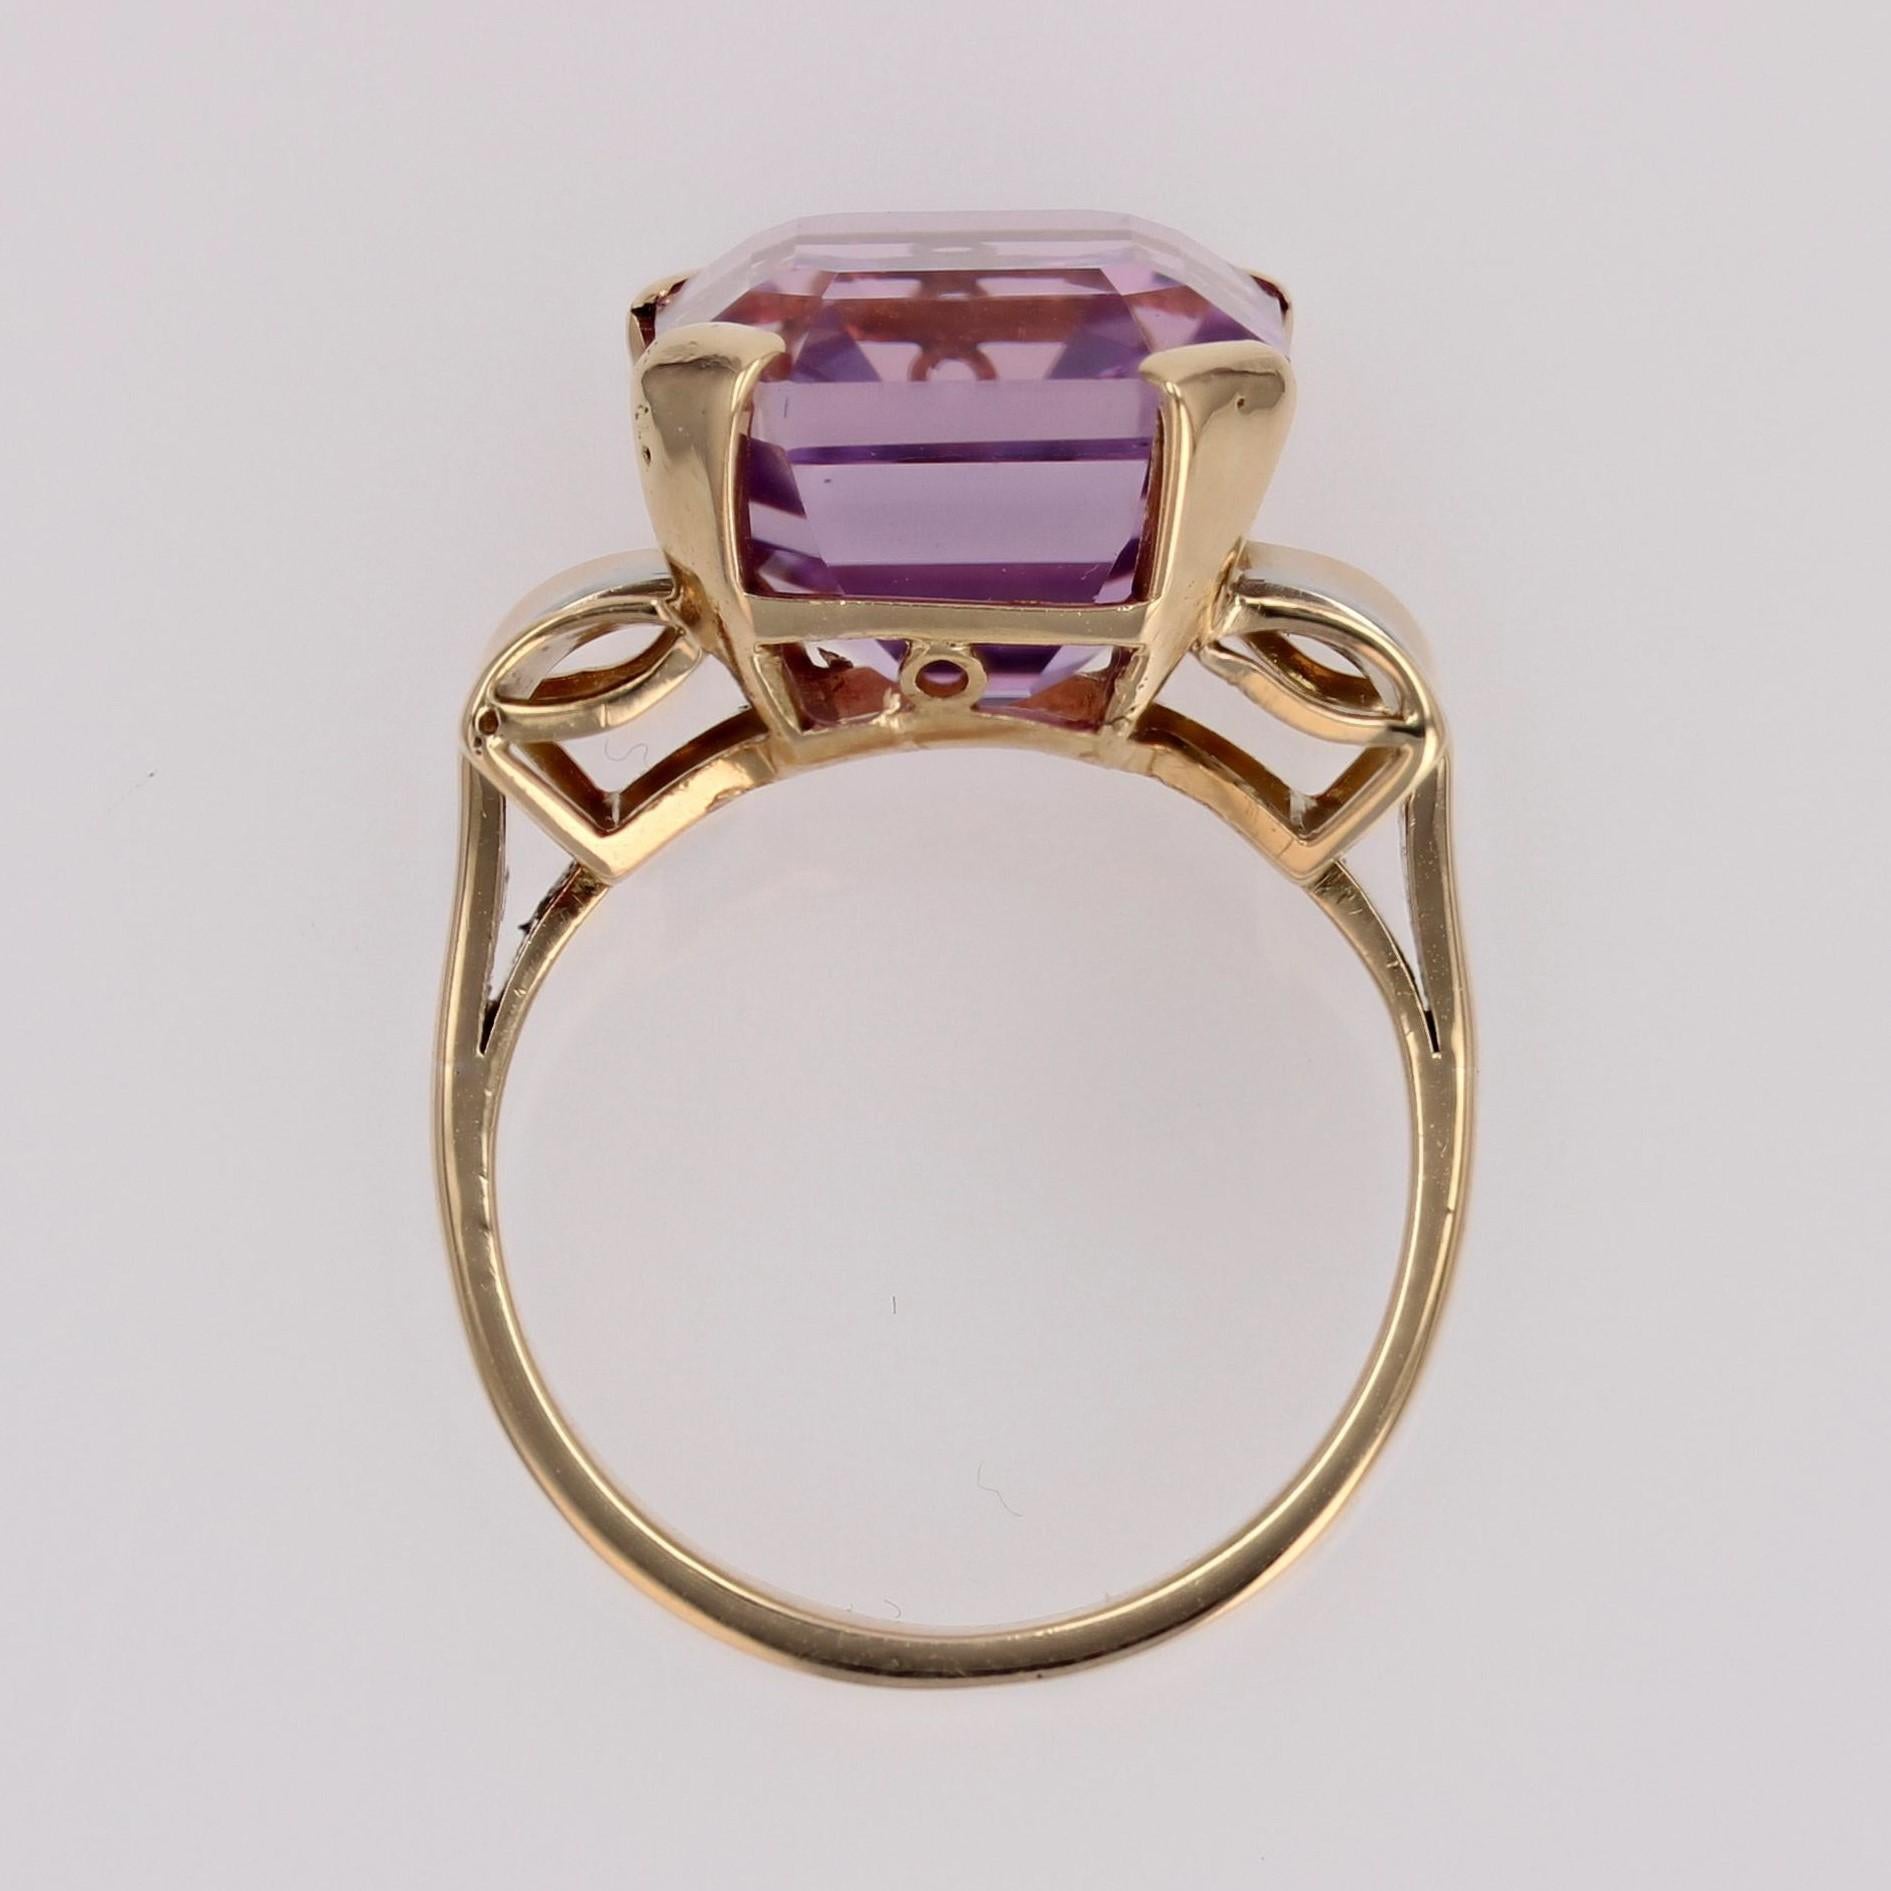 French Retro 1950s 11.29 Carats Kunzite 18 Karat Yellow Gold Cocktail Ring For Sale 9